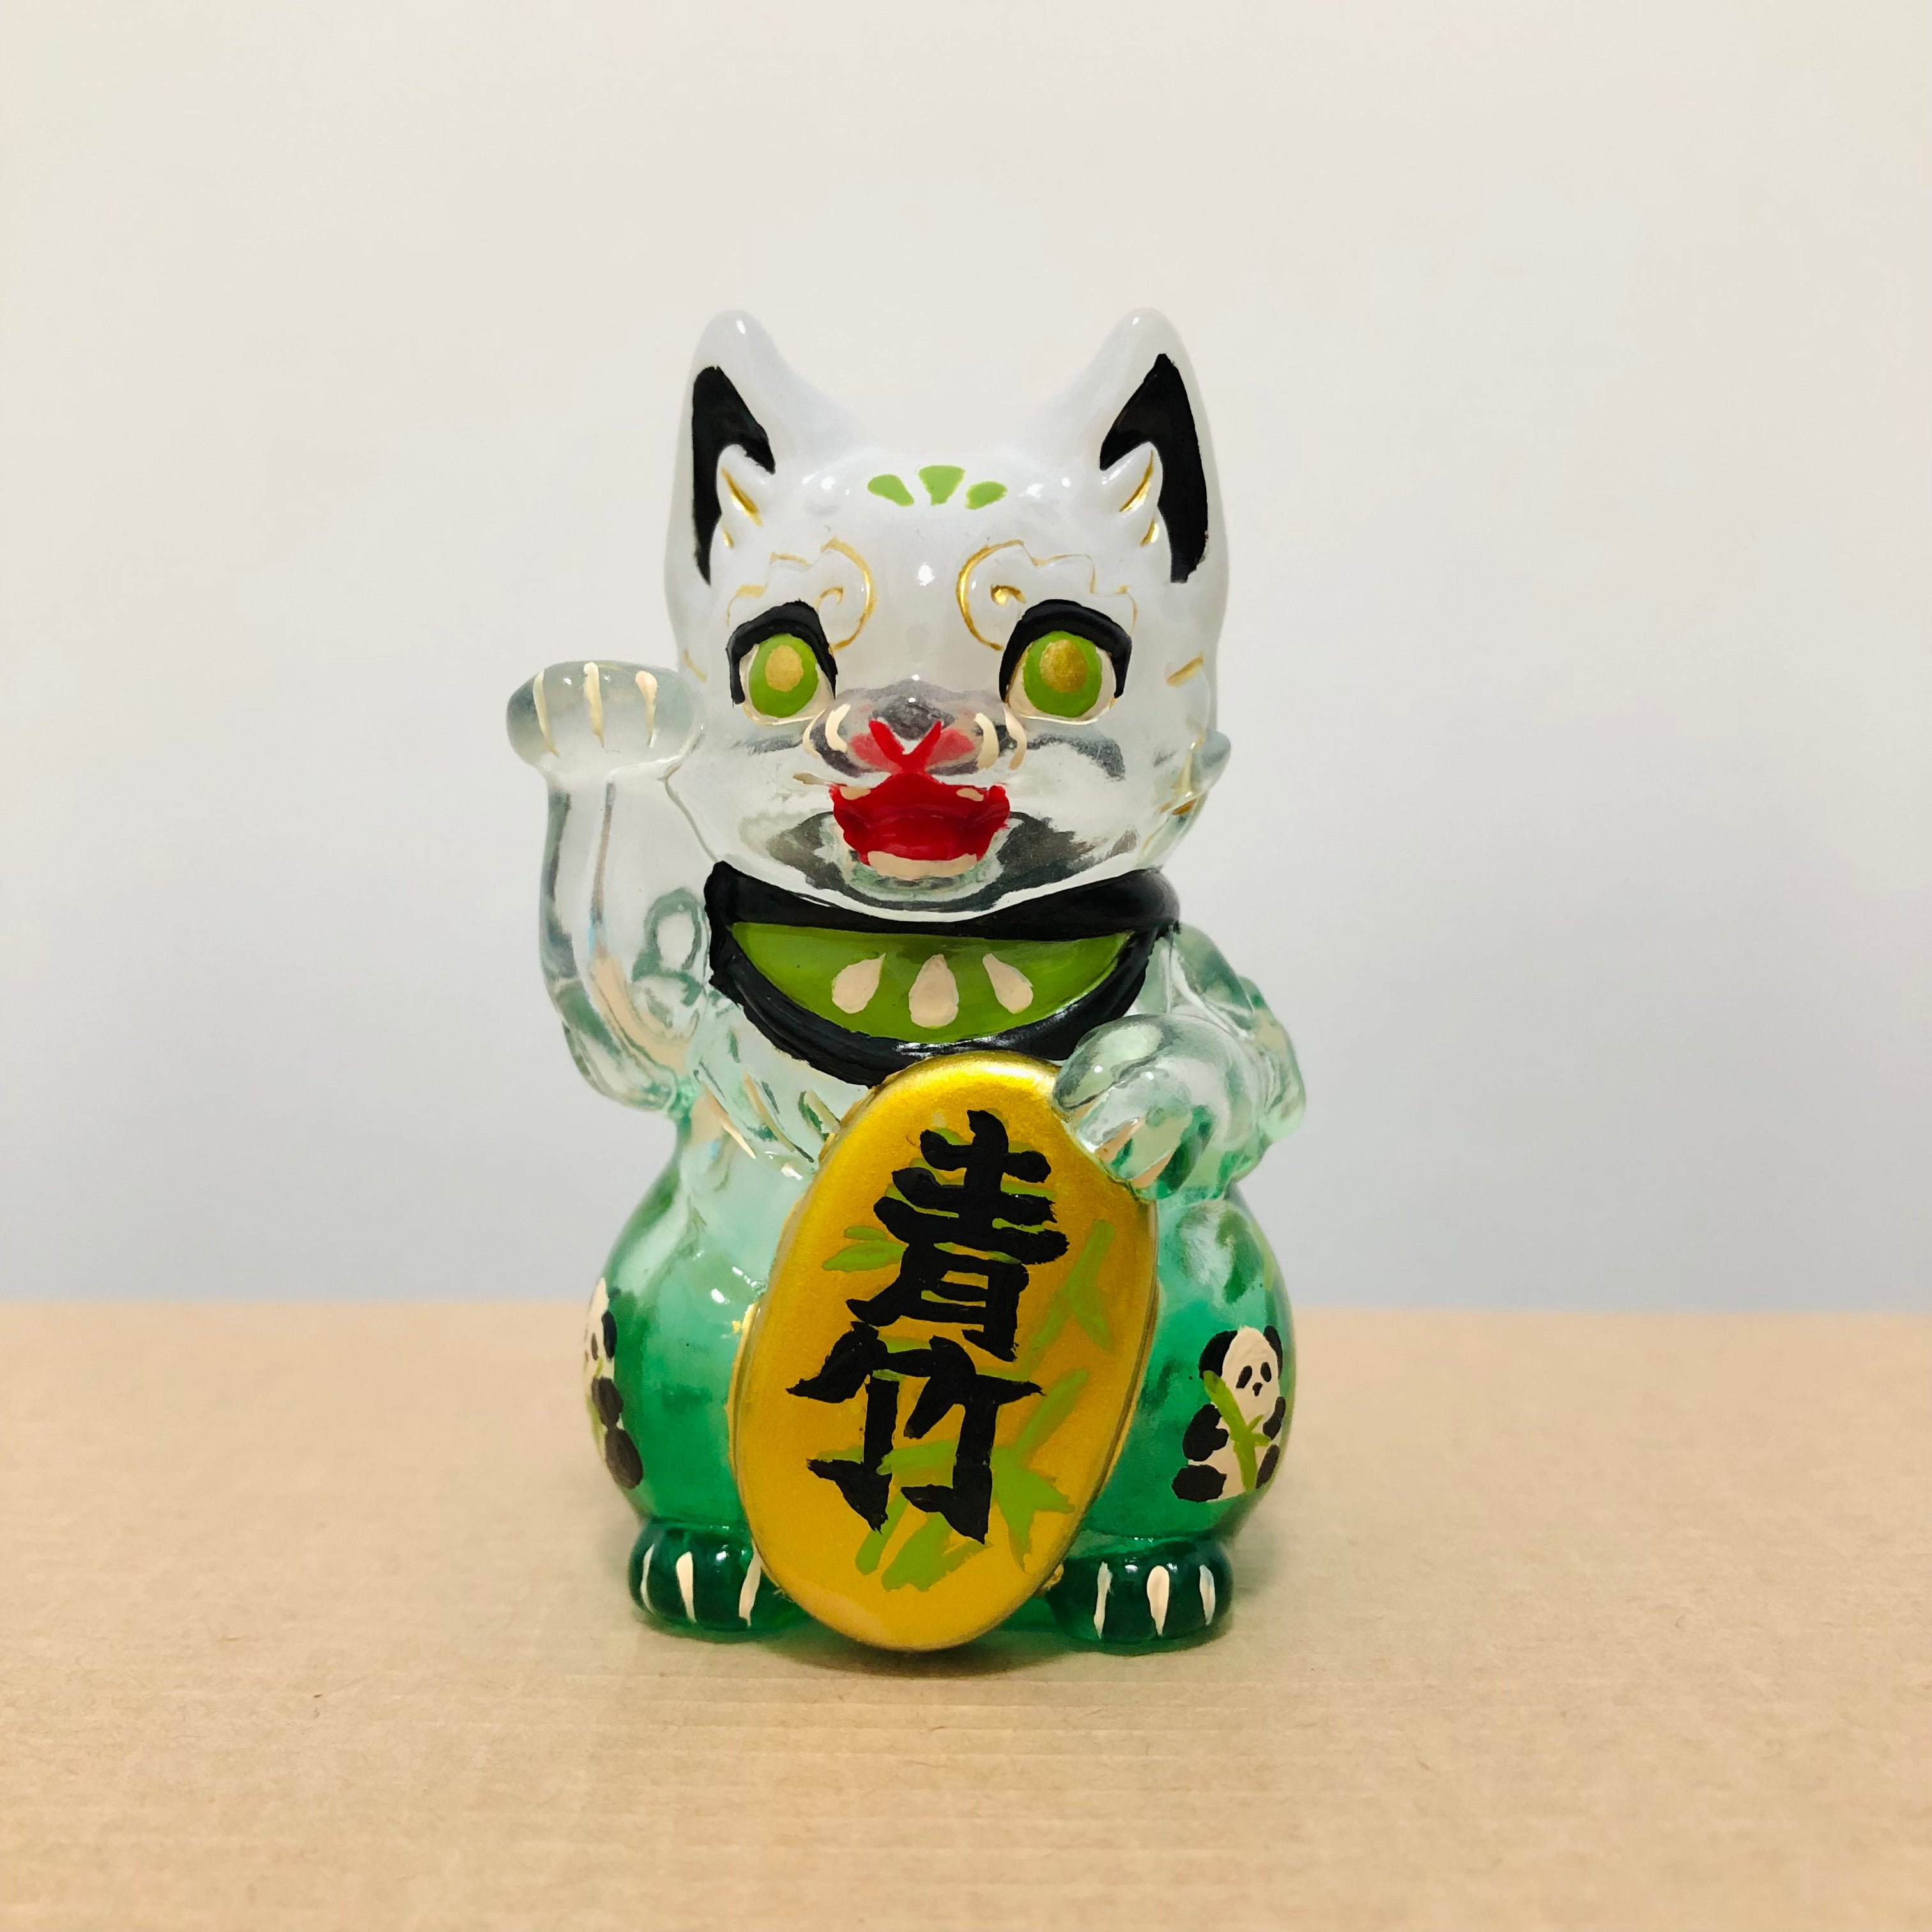 Bake Lucky Cat figurine, small vinyl toy of a cat with gold sign, close-up details.